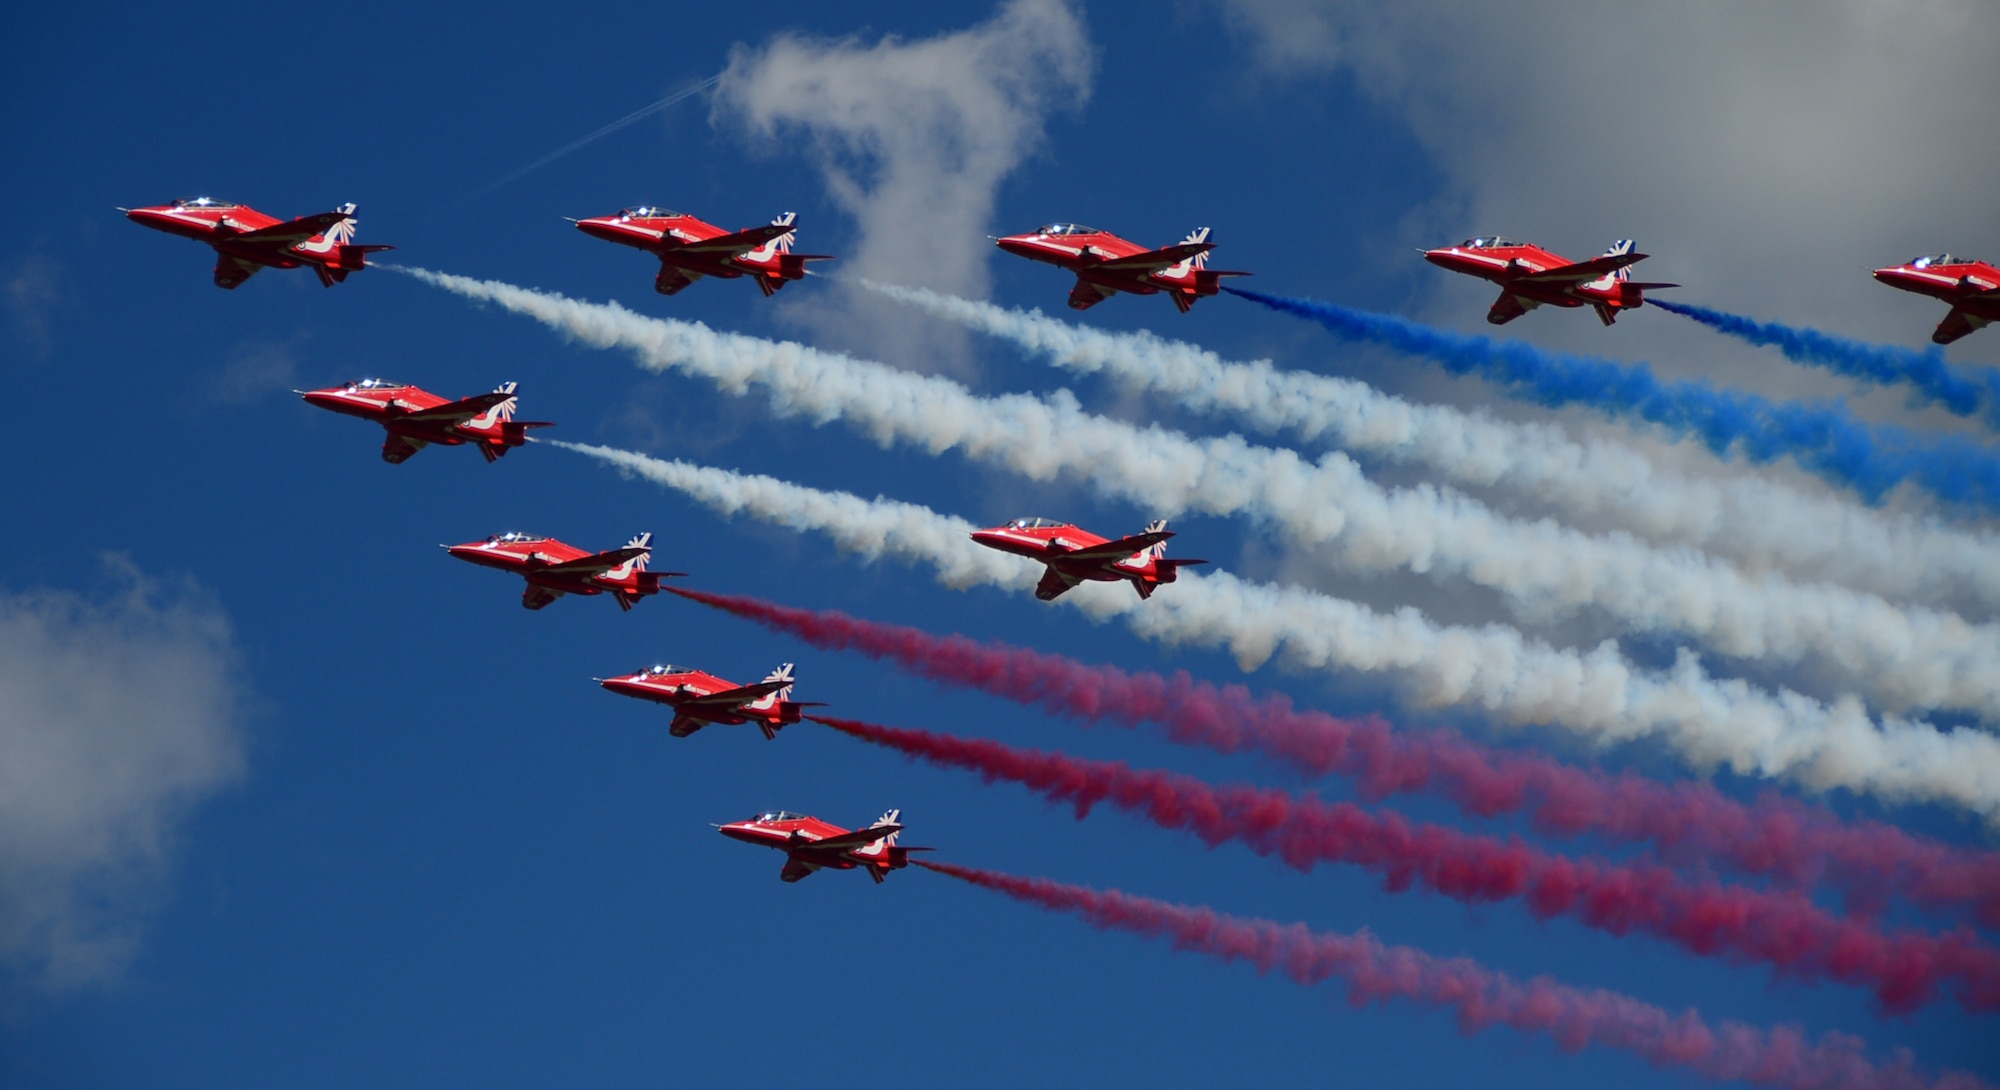 The Royal Air Force aerobatic team, The Red Arrows, fly over a crowd July 14, 2014, during the Farnborough International Airshow in England. Held every two years, the airshow represents a unique opportunity for the U.S. and its allies to show case their leadership in aerospace technologies. (U.S. Air Force photo/Airman 1st Class Erin O'Shea)